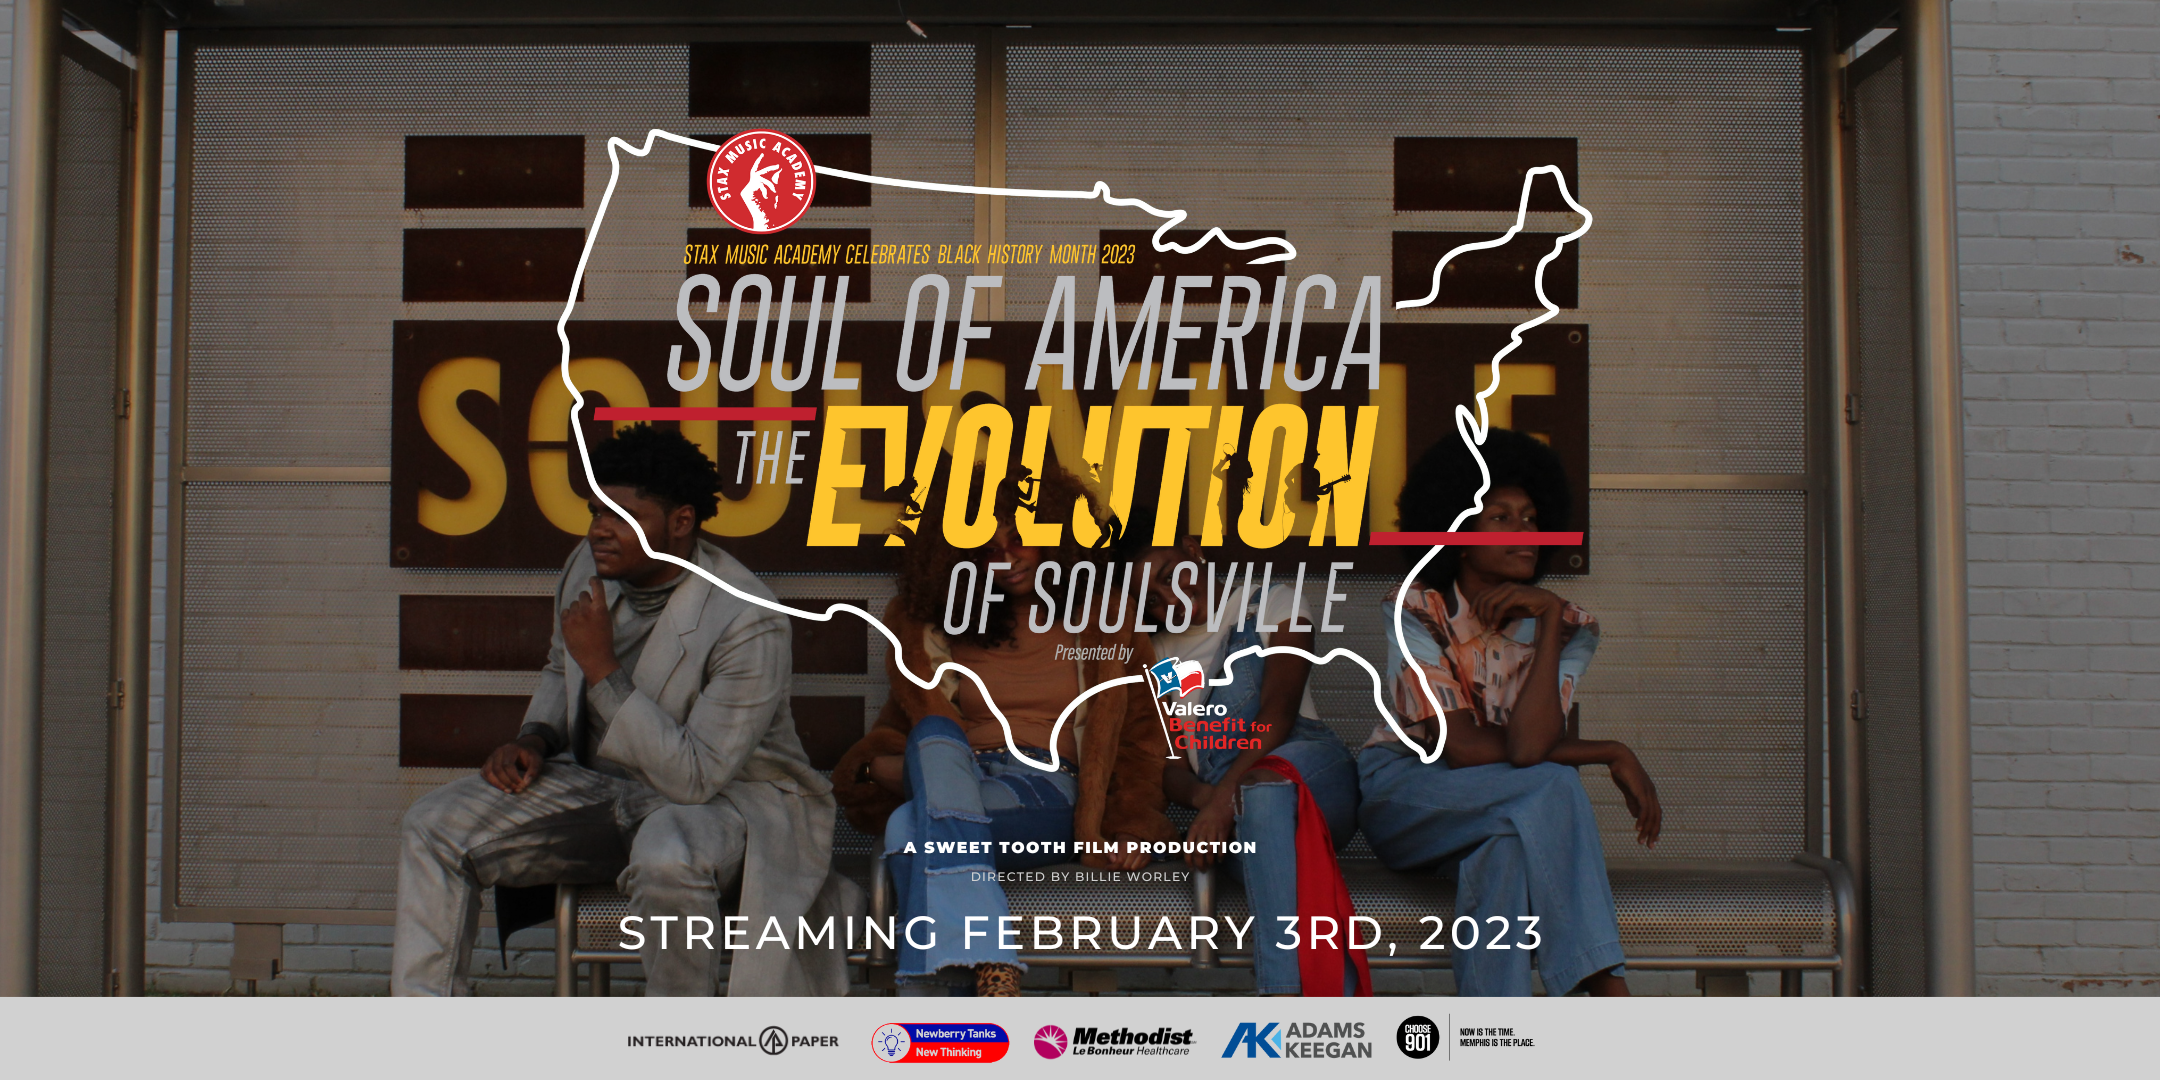 The poster for the Soul of America exhibition.